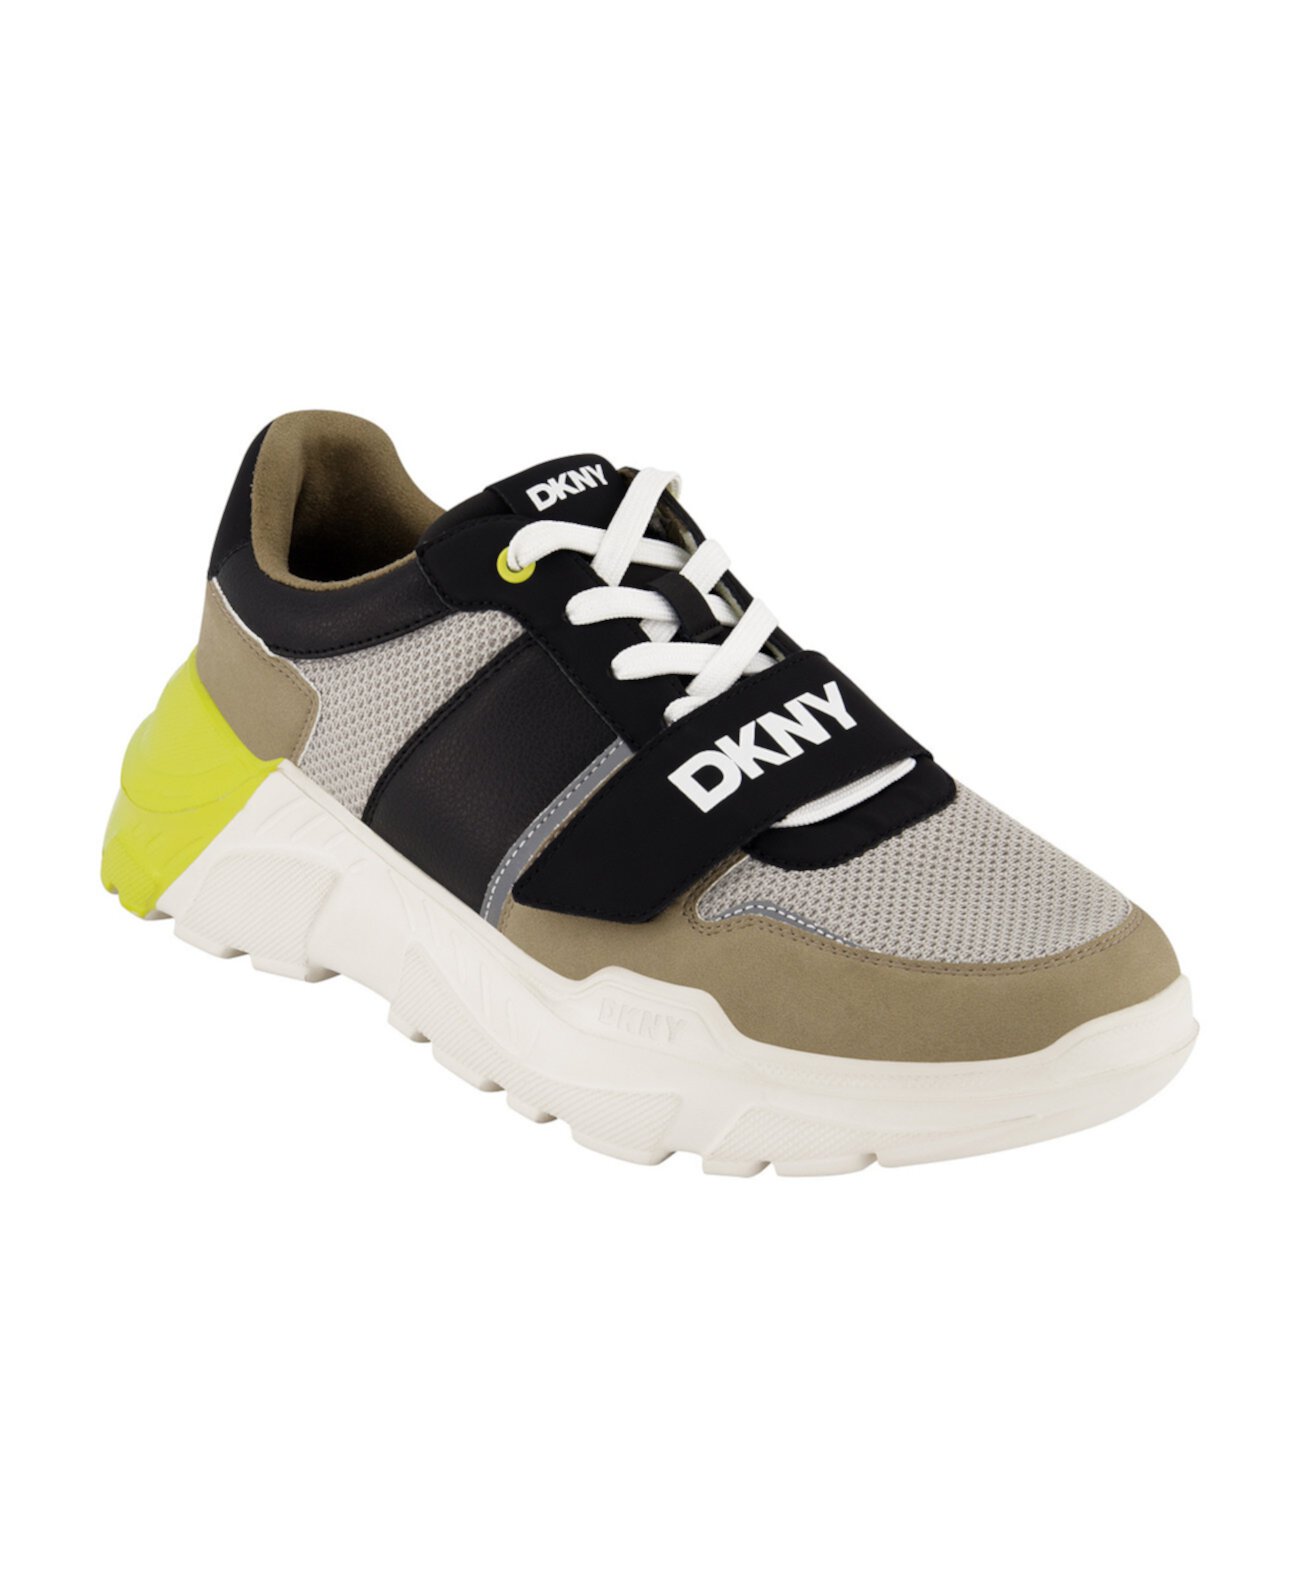 Men's Mixed Media Runner with Front Logo Strap Sneakers DKNY